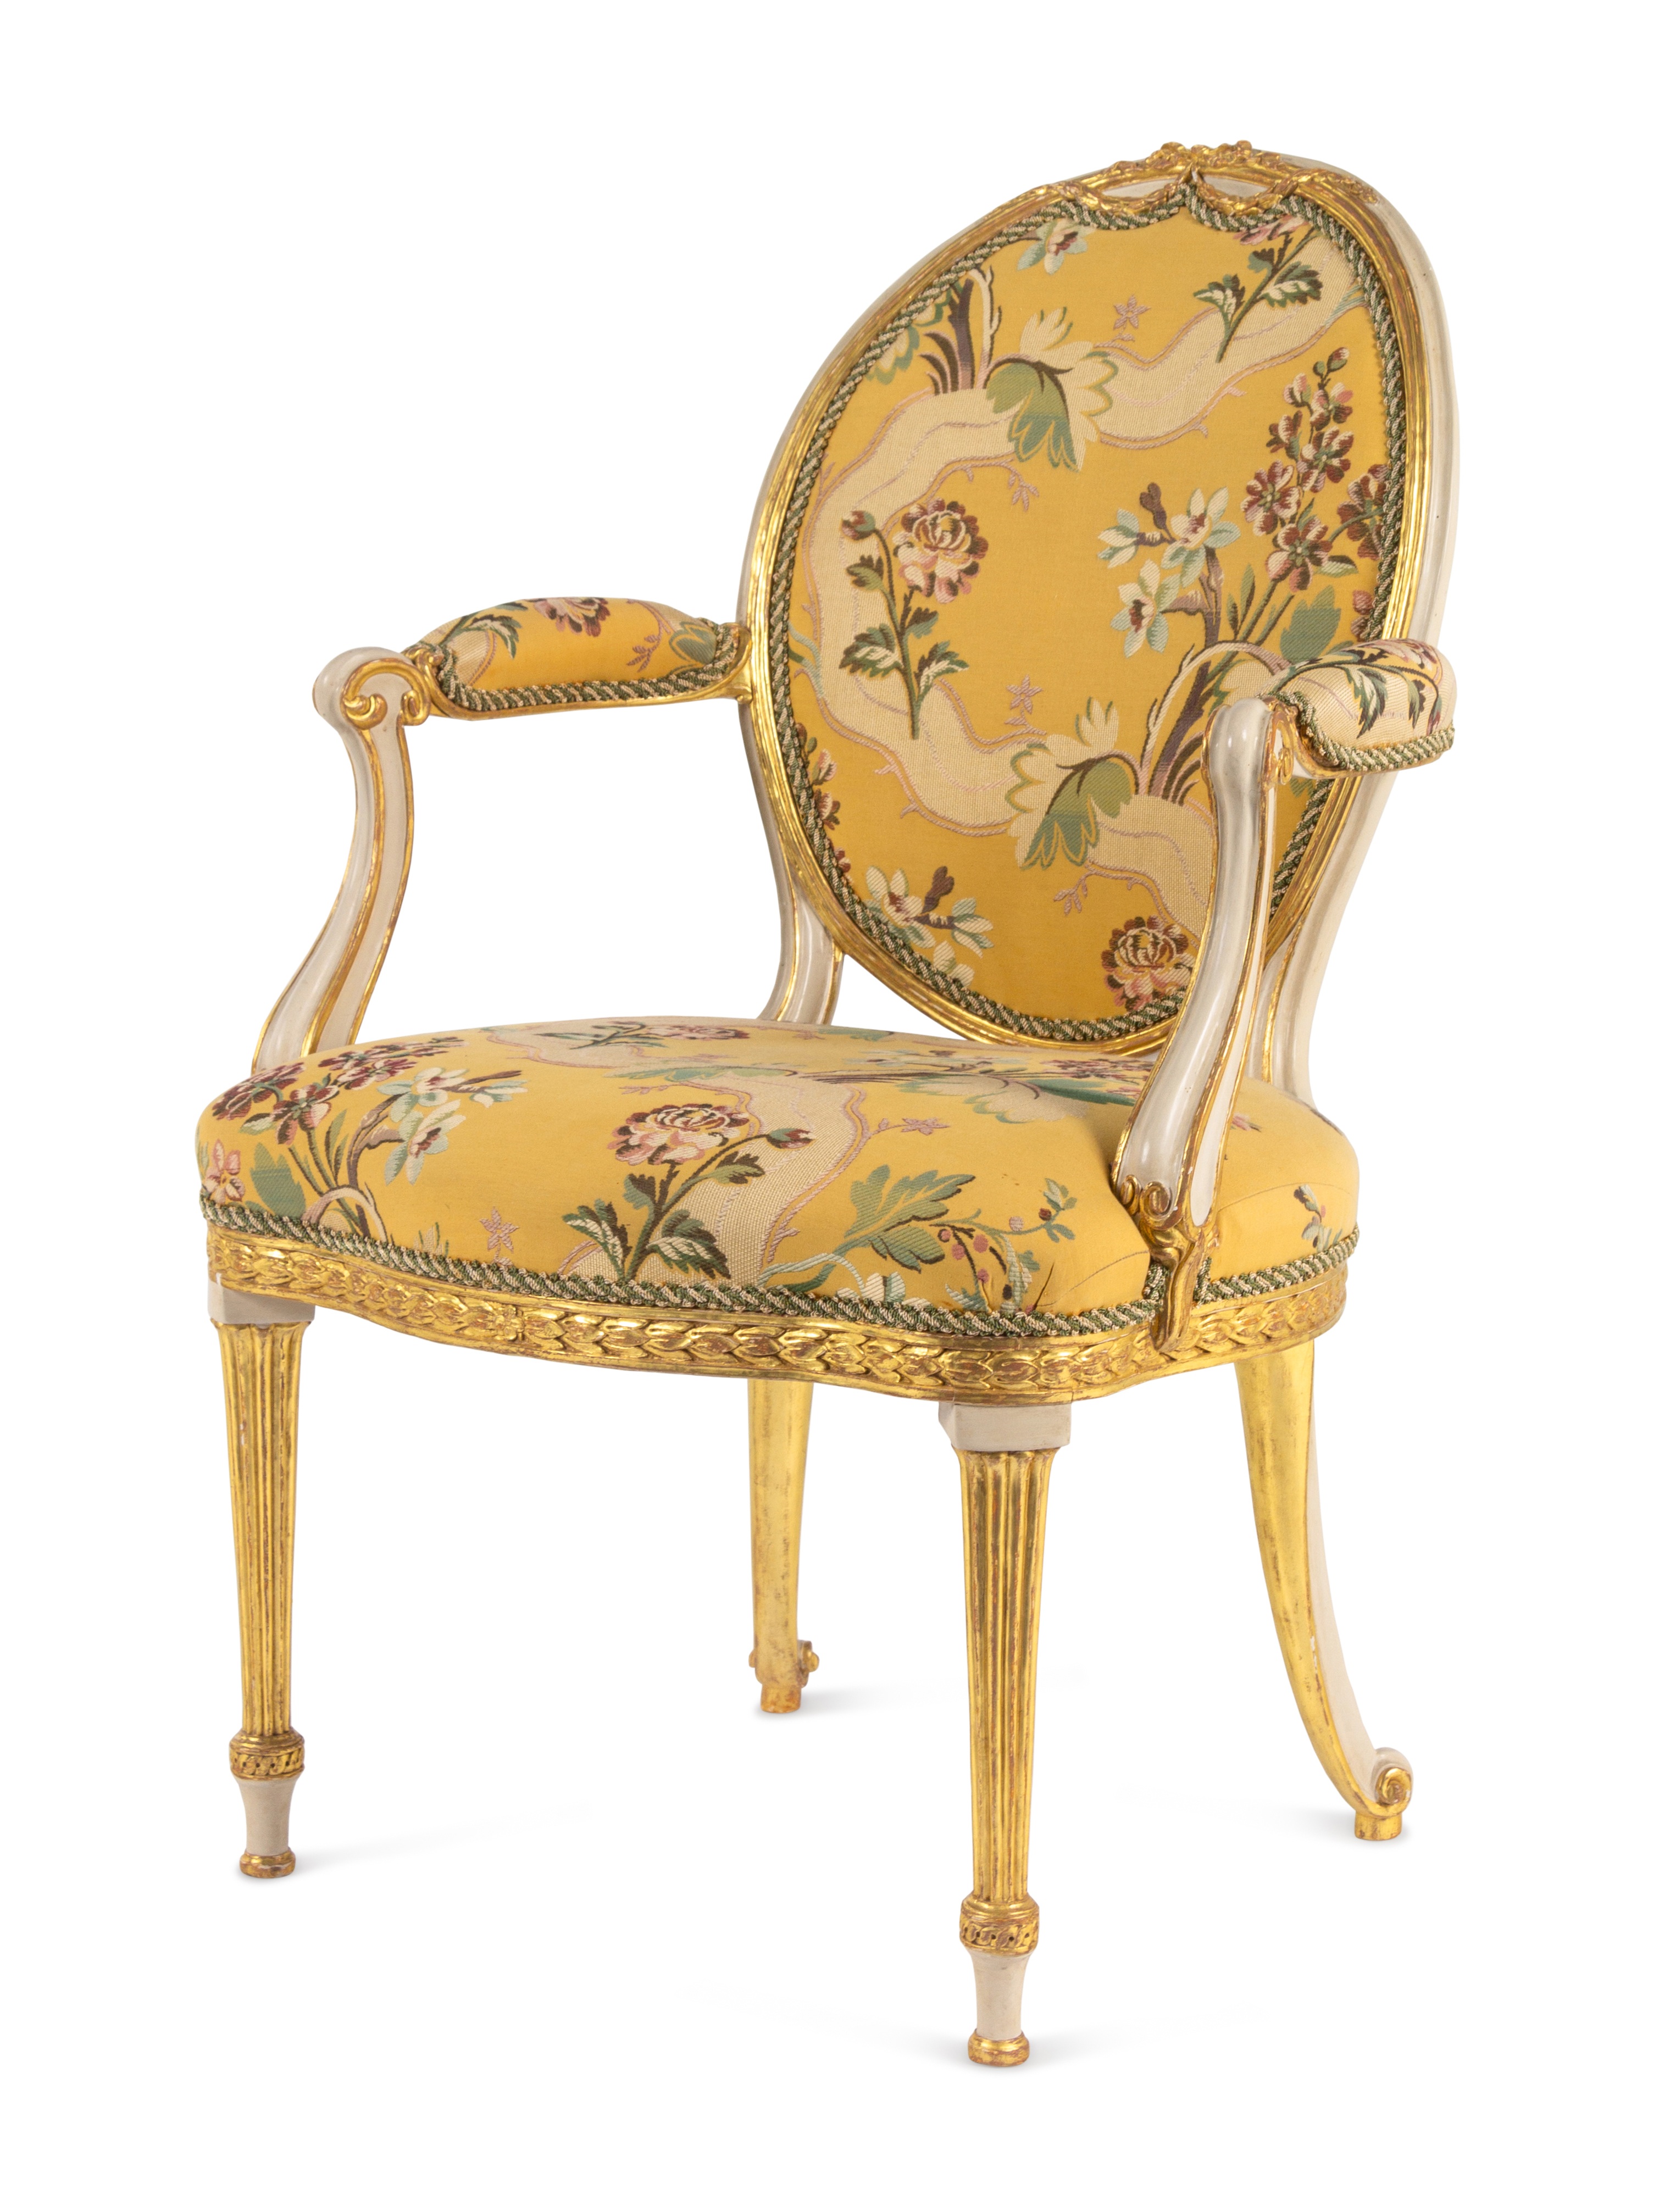 A George III White-Painted and Parcel-Gilt Open Armchair - Image 2 of 12